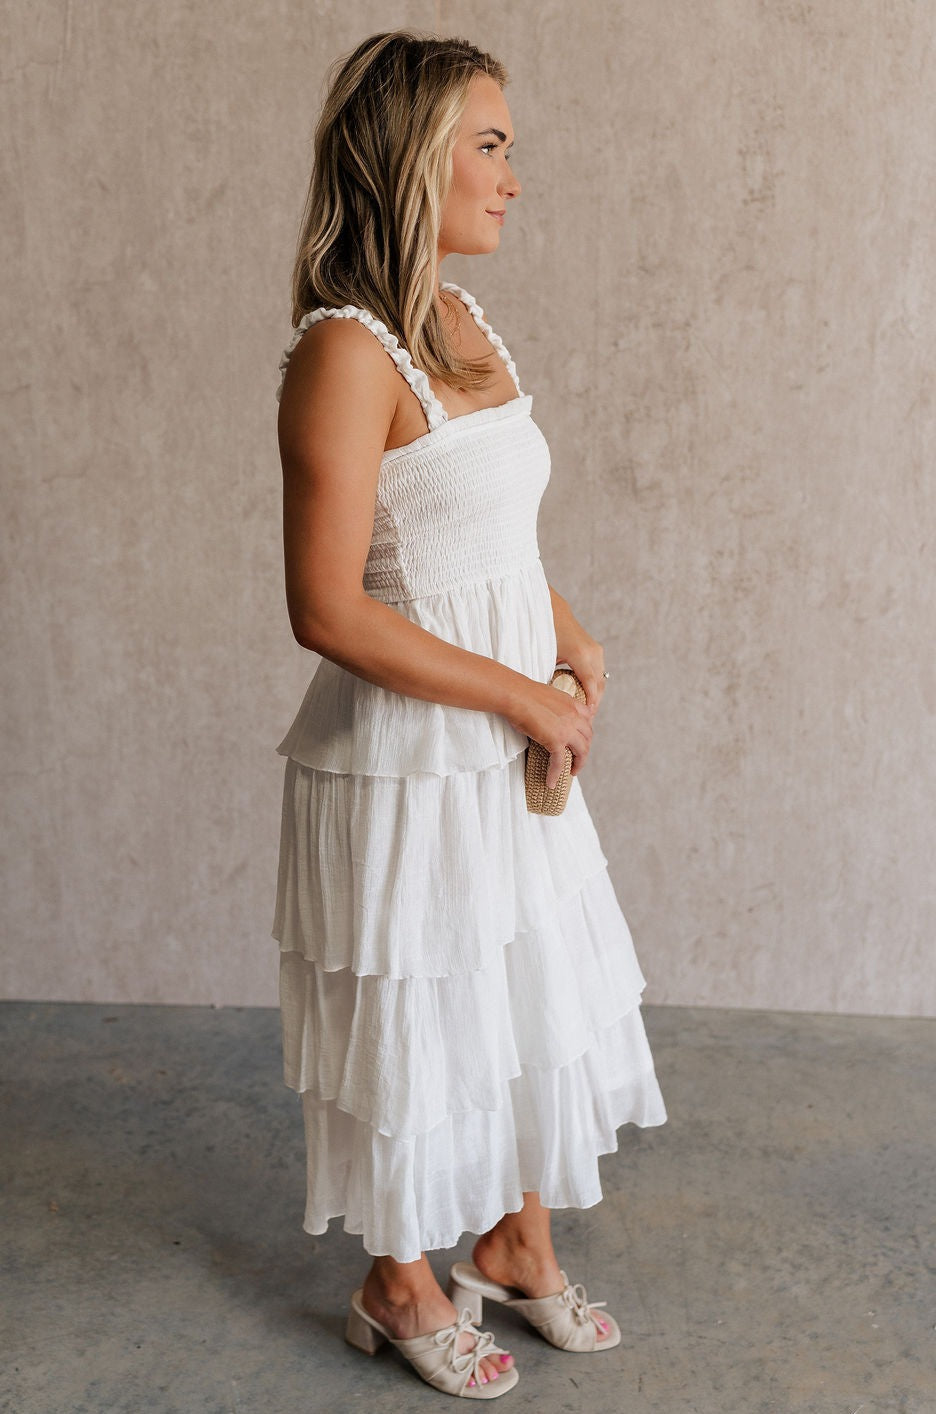 Full body side view of female model wearing the Nova Smocked Tiered Midi Dress which features Lightweight Fabric, Fully Lined, Tiered Ruffle Body, Smocked Upper, Square Neckline and Elastic Straps.